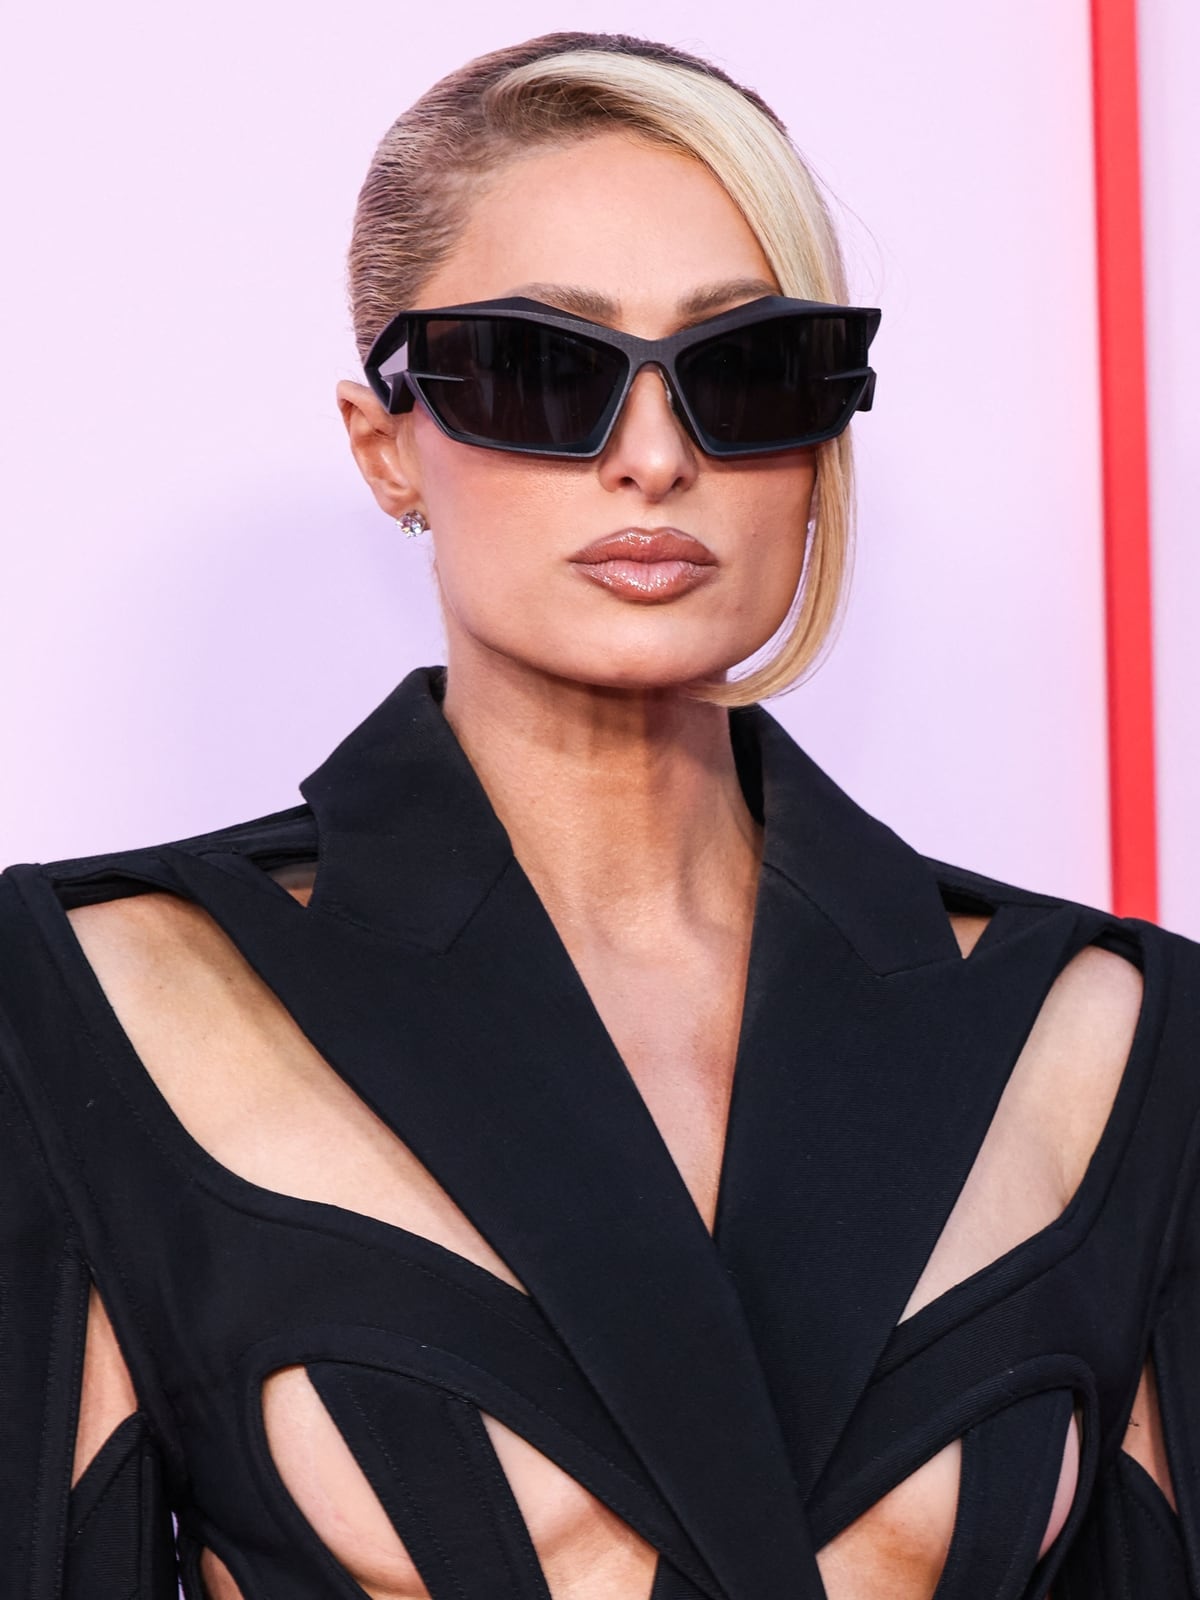 Paris Hilton's minimalistic approach to accessories allows her bold Mugler dress to remain the focal point, complemented by simple diamond studs and oversized square sunglasses